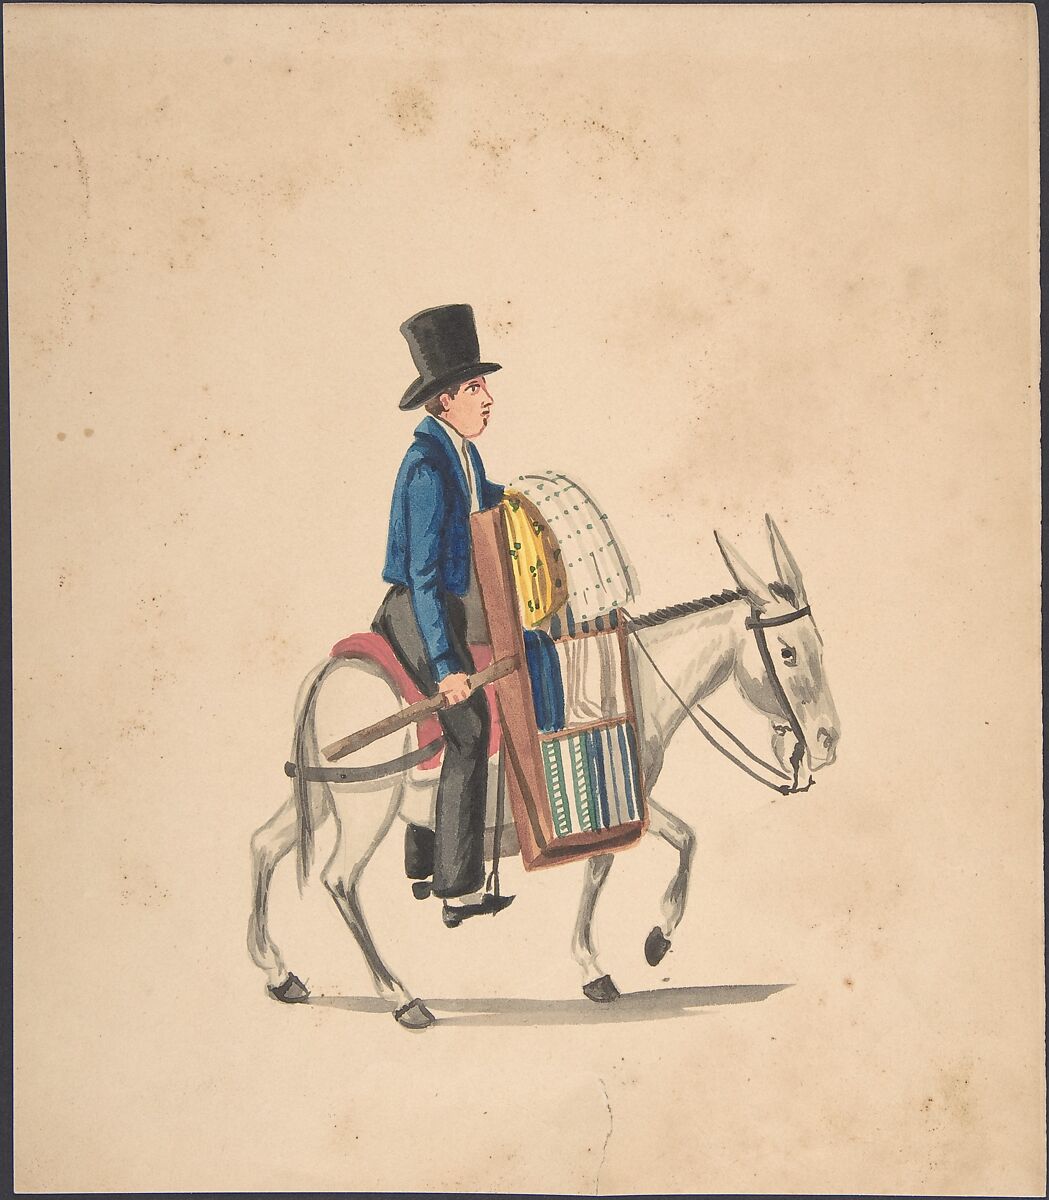 A Man Riding on a Donkey, Anonymous, Peruvian, 19th century, brush and ink and watercolor on wove paper 